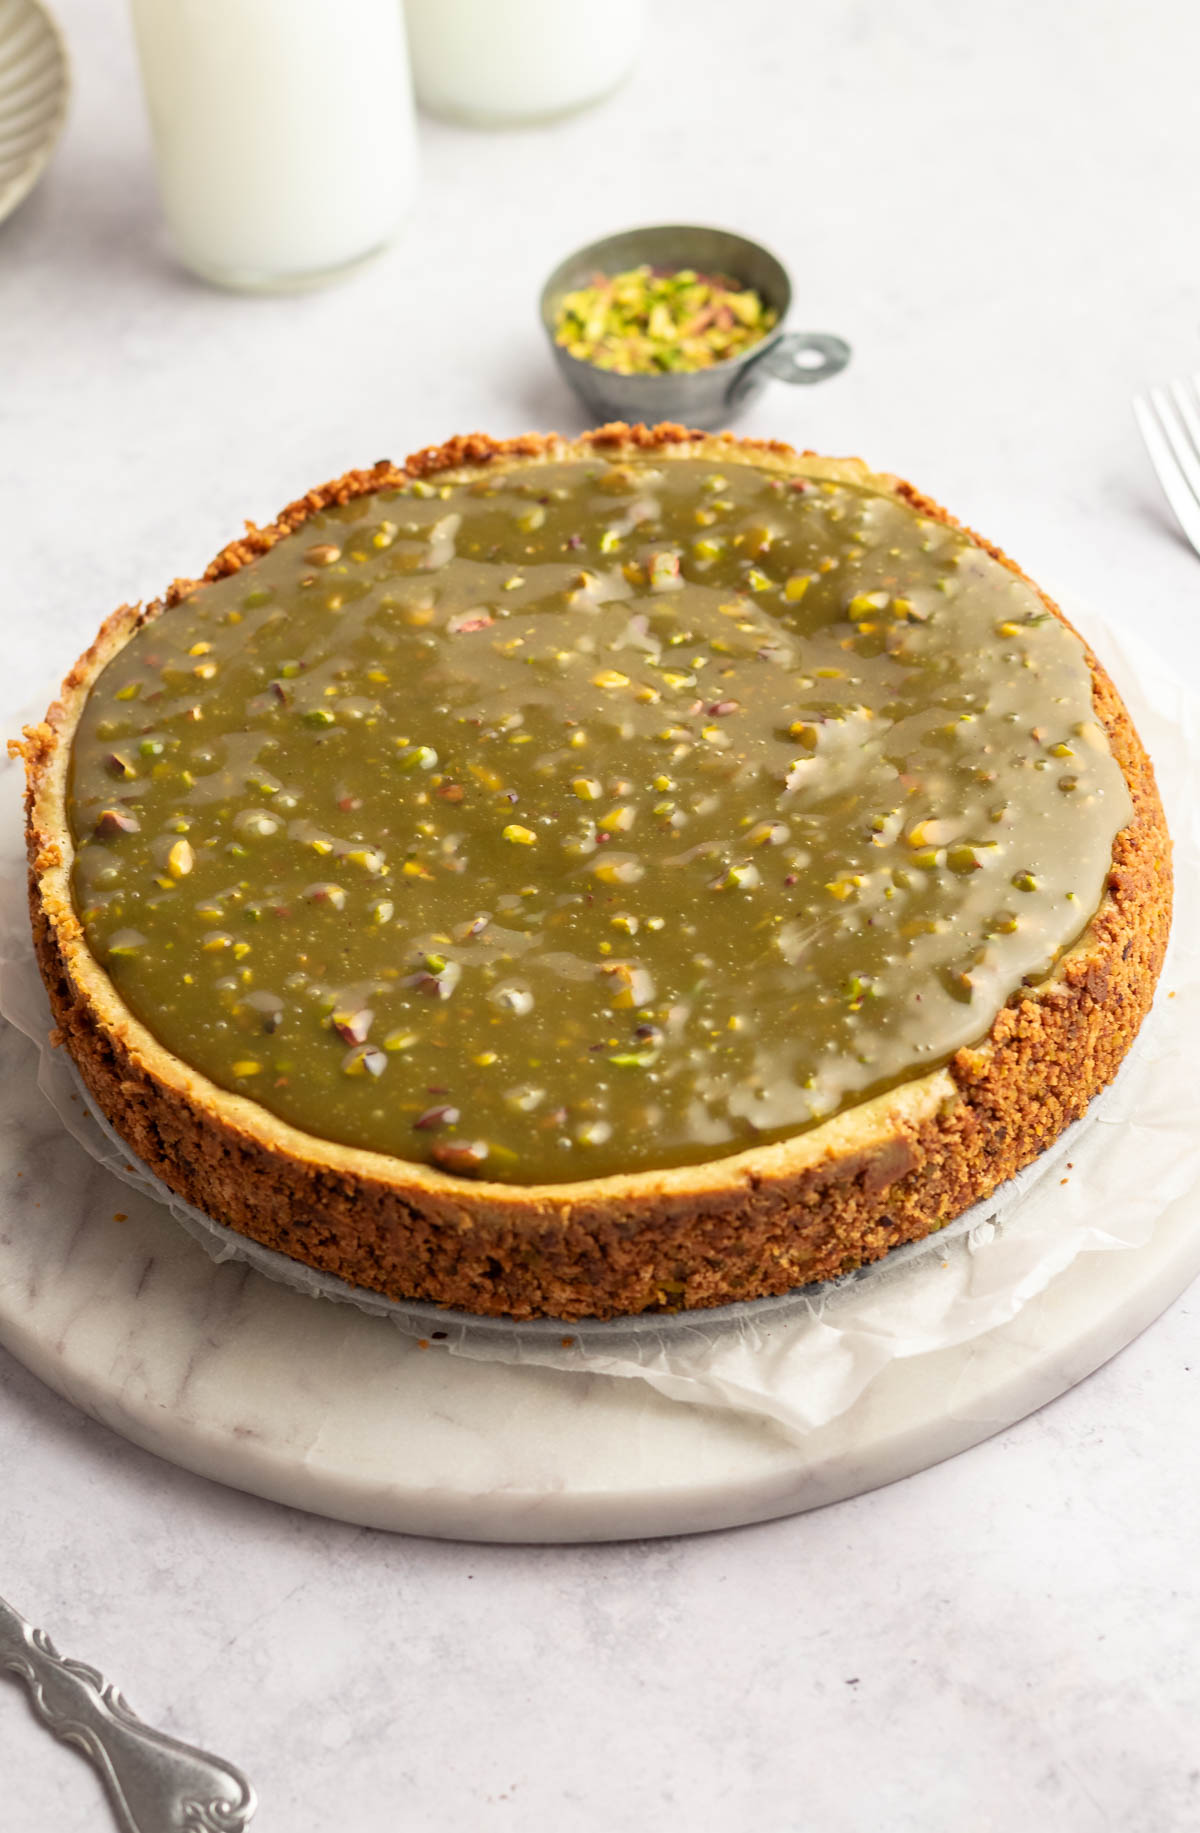 Pistachio cheesecake on a cake plate.